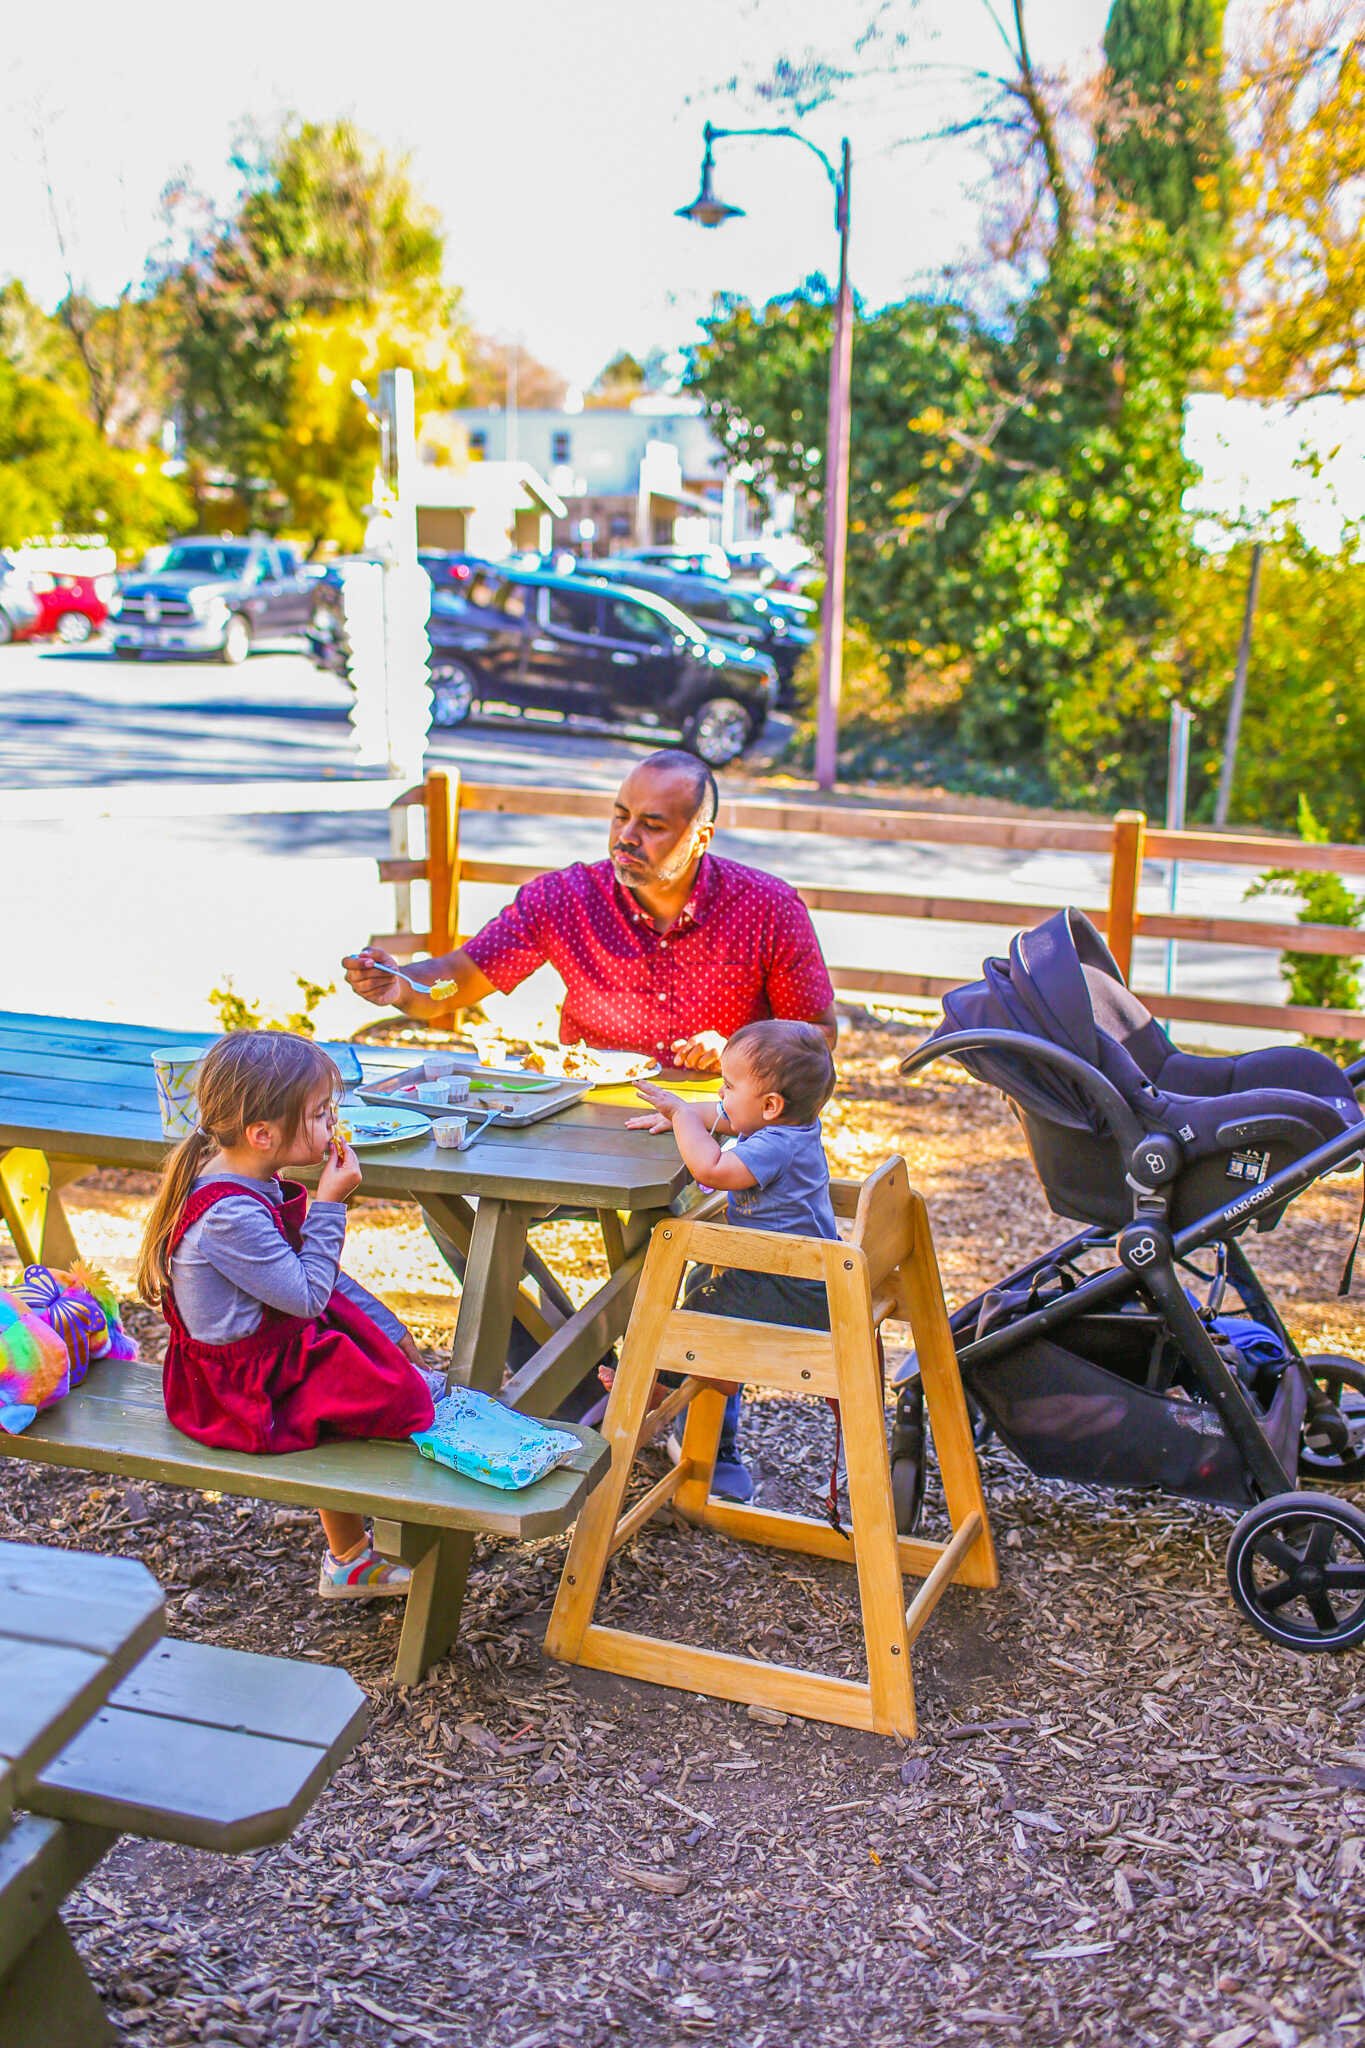 The Complete Travel Guide to Julian, California - Family lunch at the Julian Beer Company.